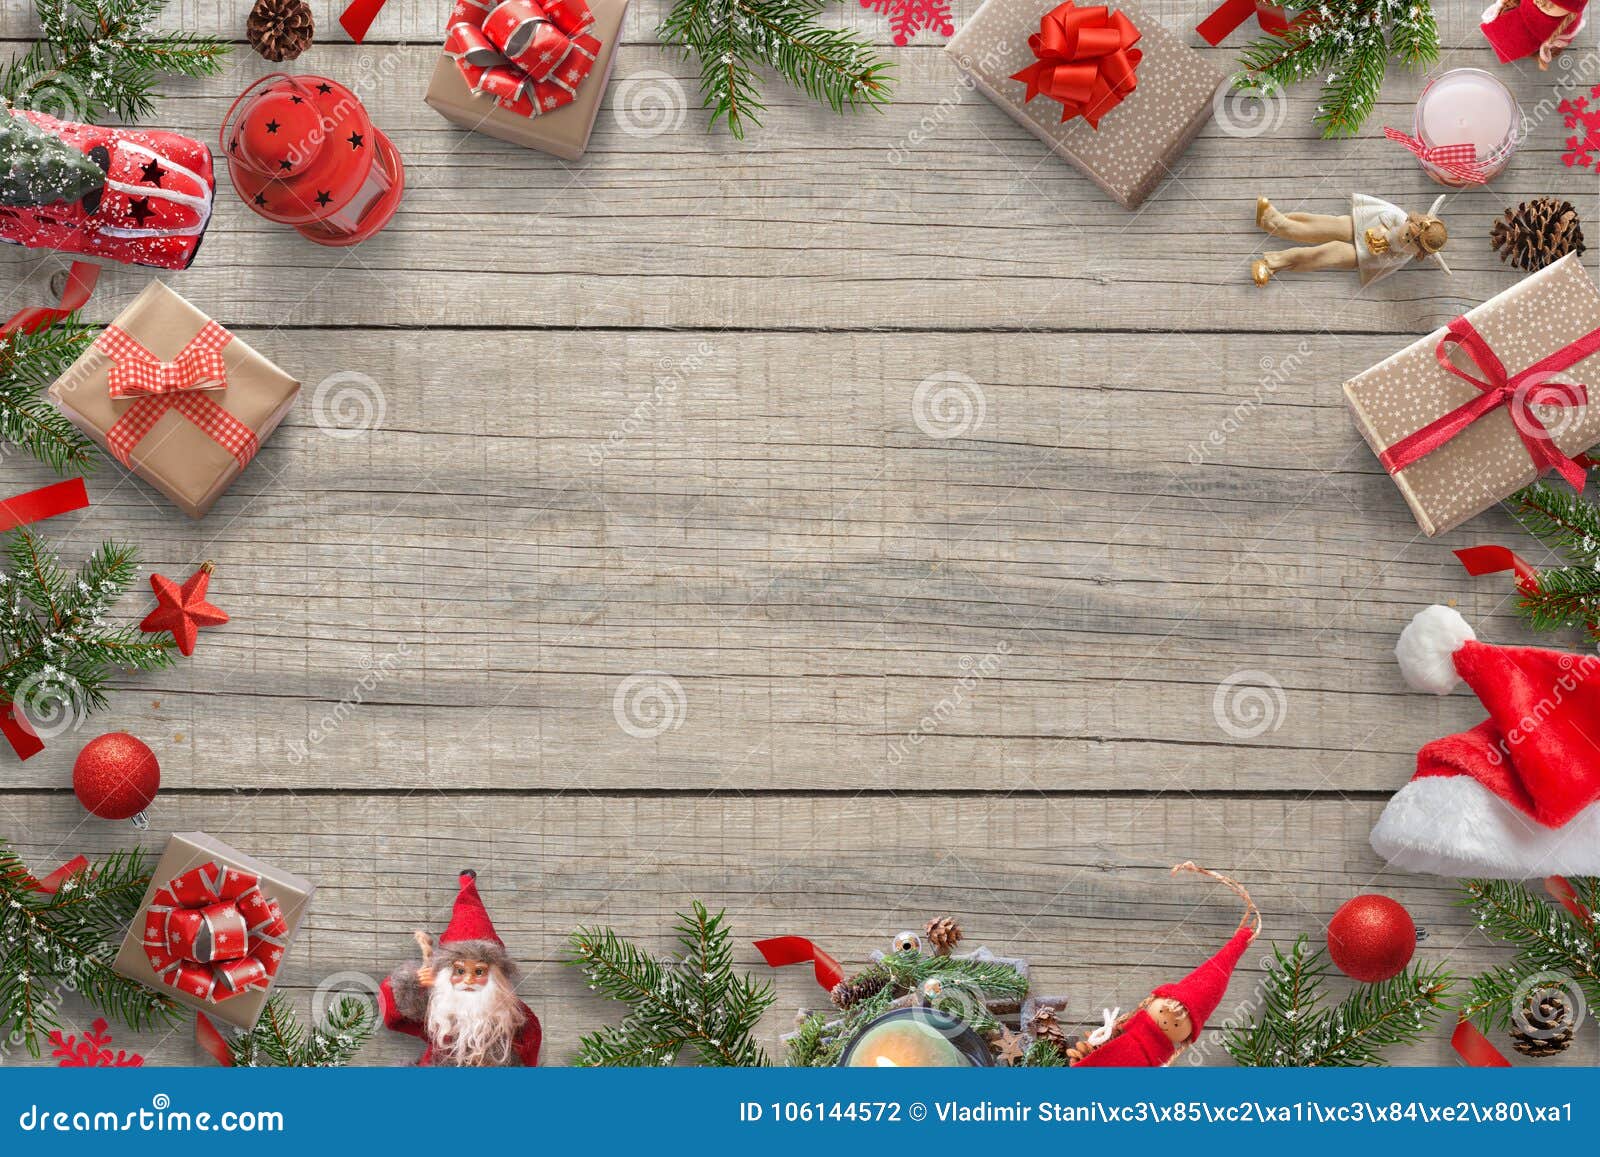 Christmas Decorations Background Image With Free Space For